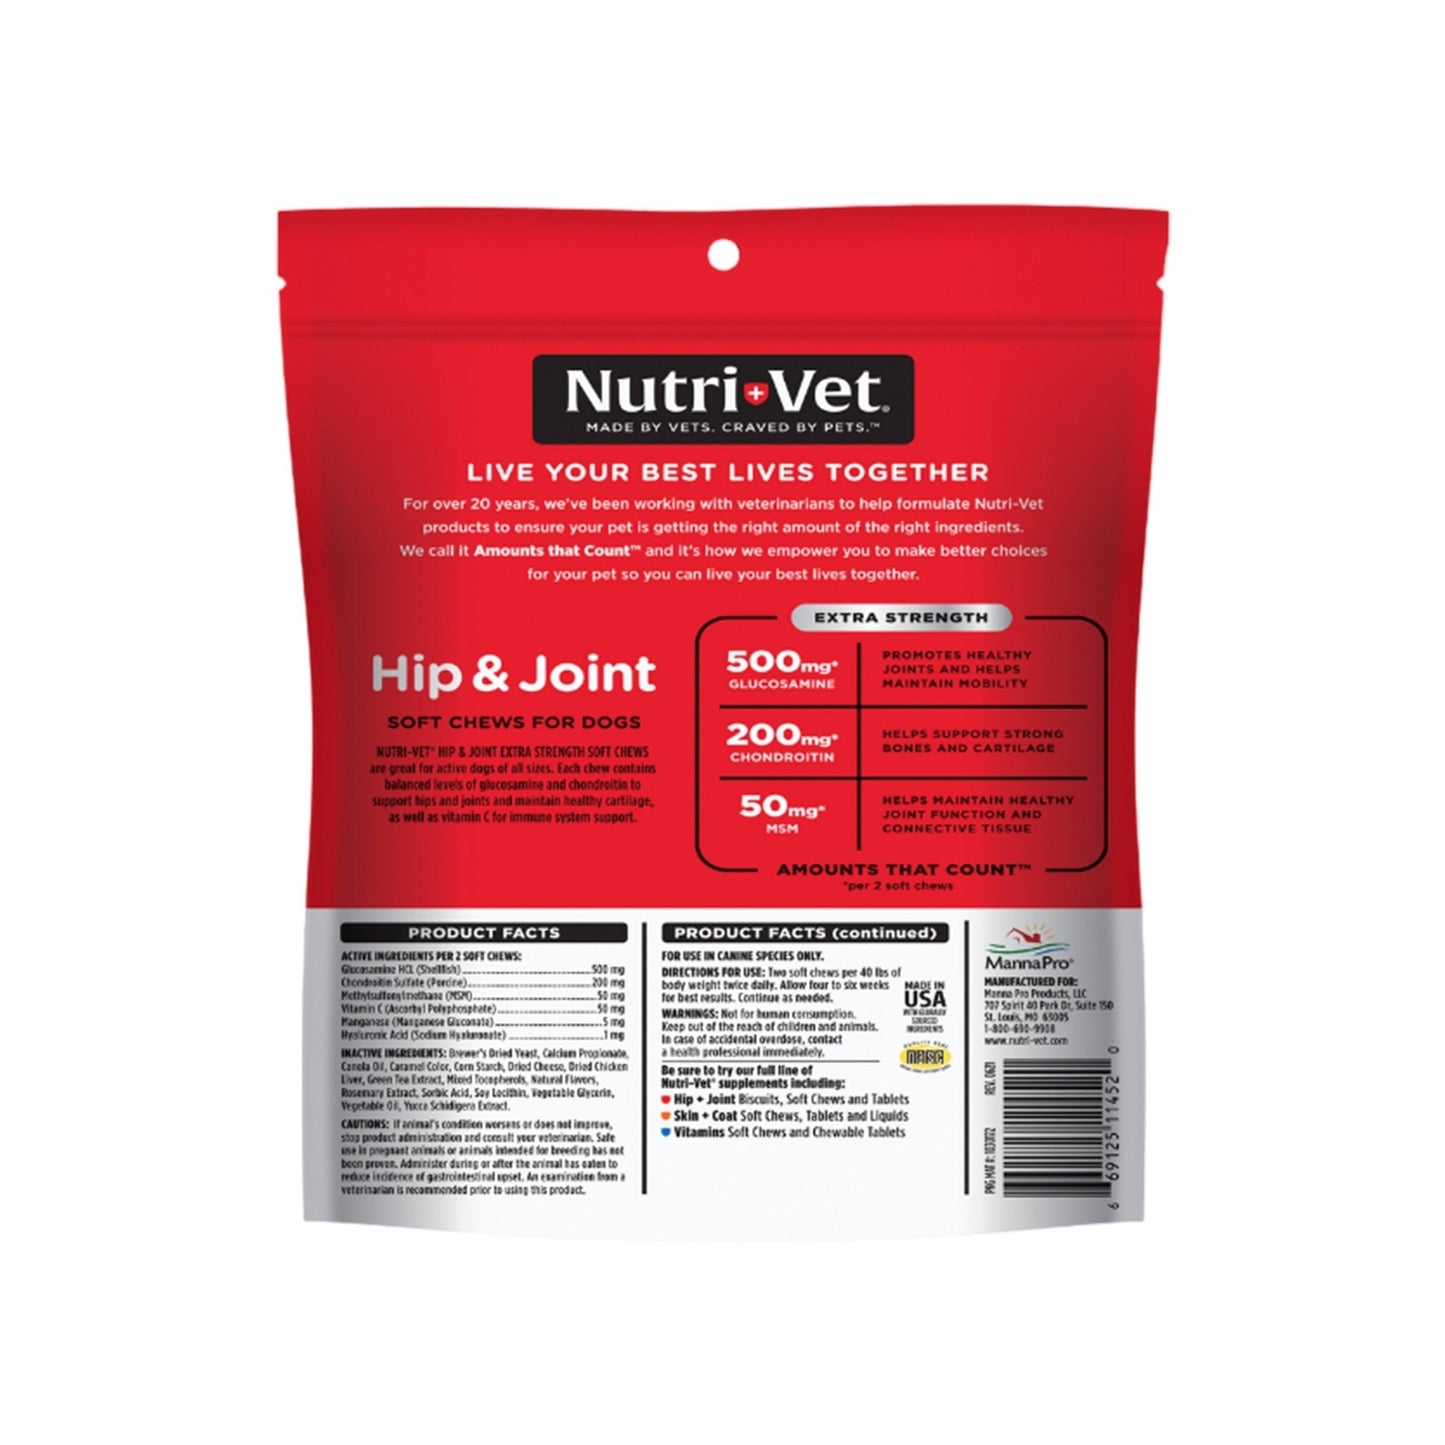 Nutri-Vet Hip & Joint Extra Strength Soft Chews For Dogs, 4.2 oz, 60 ct - Kwik Pets